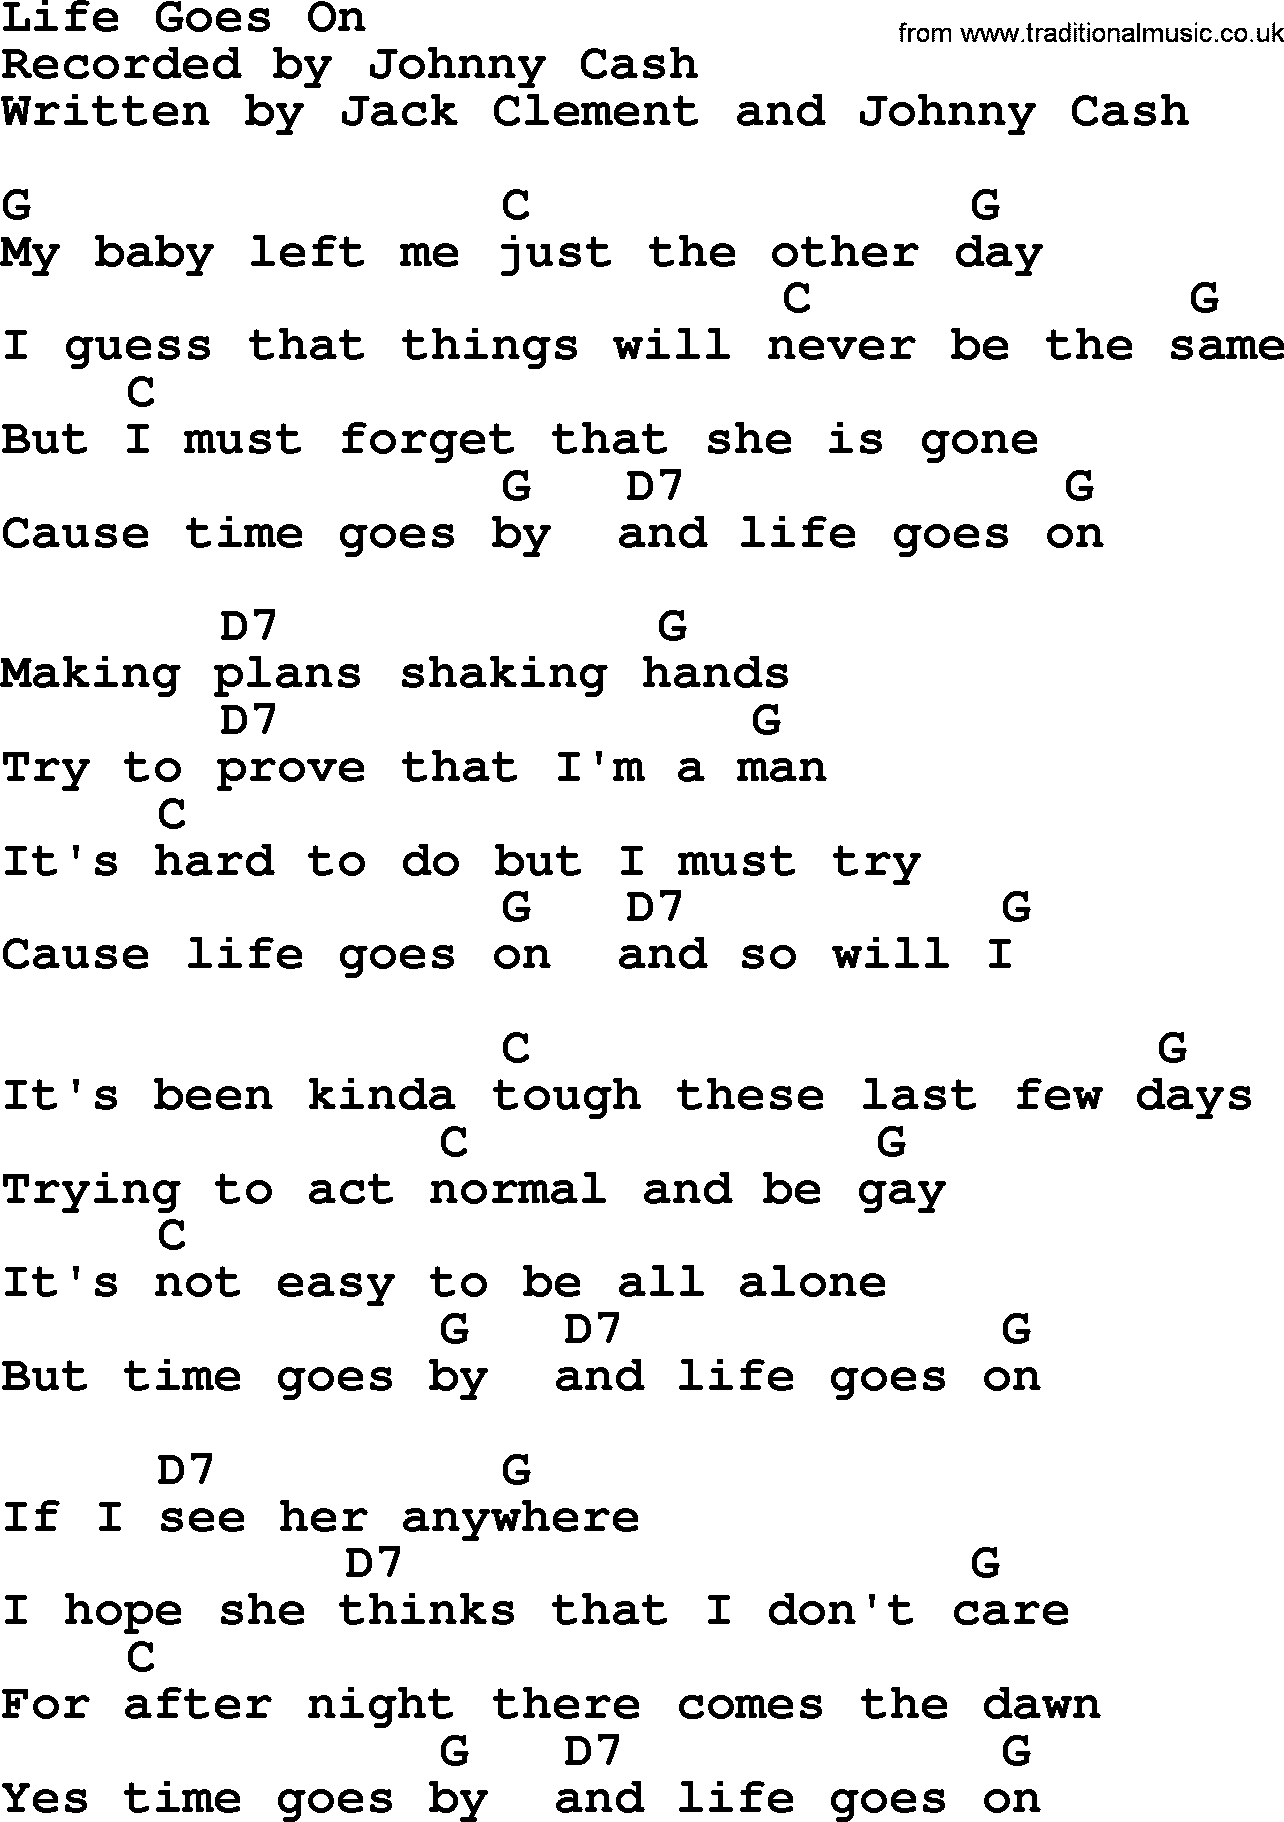 Johnny Cash Song Life Goes On Lyrics And Chords